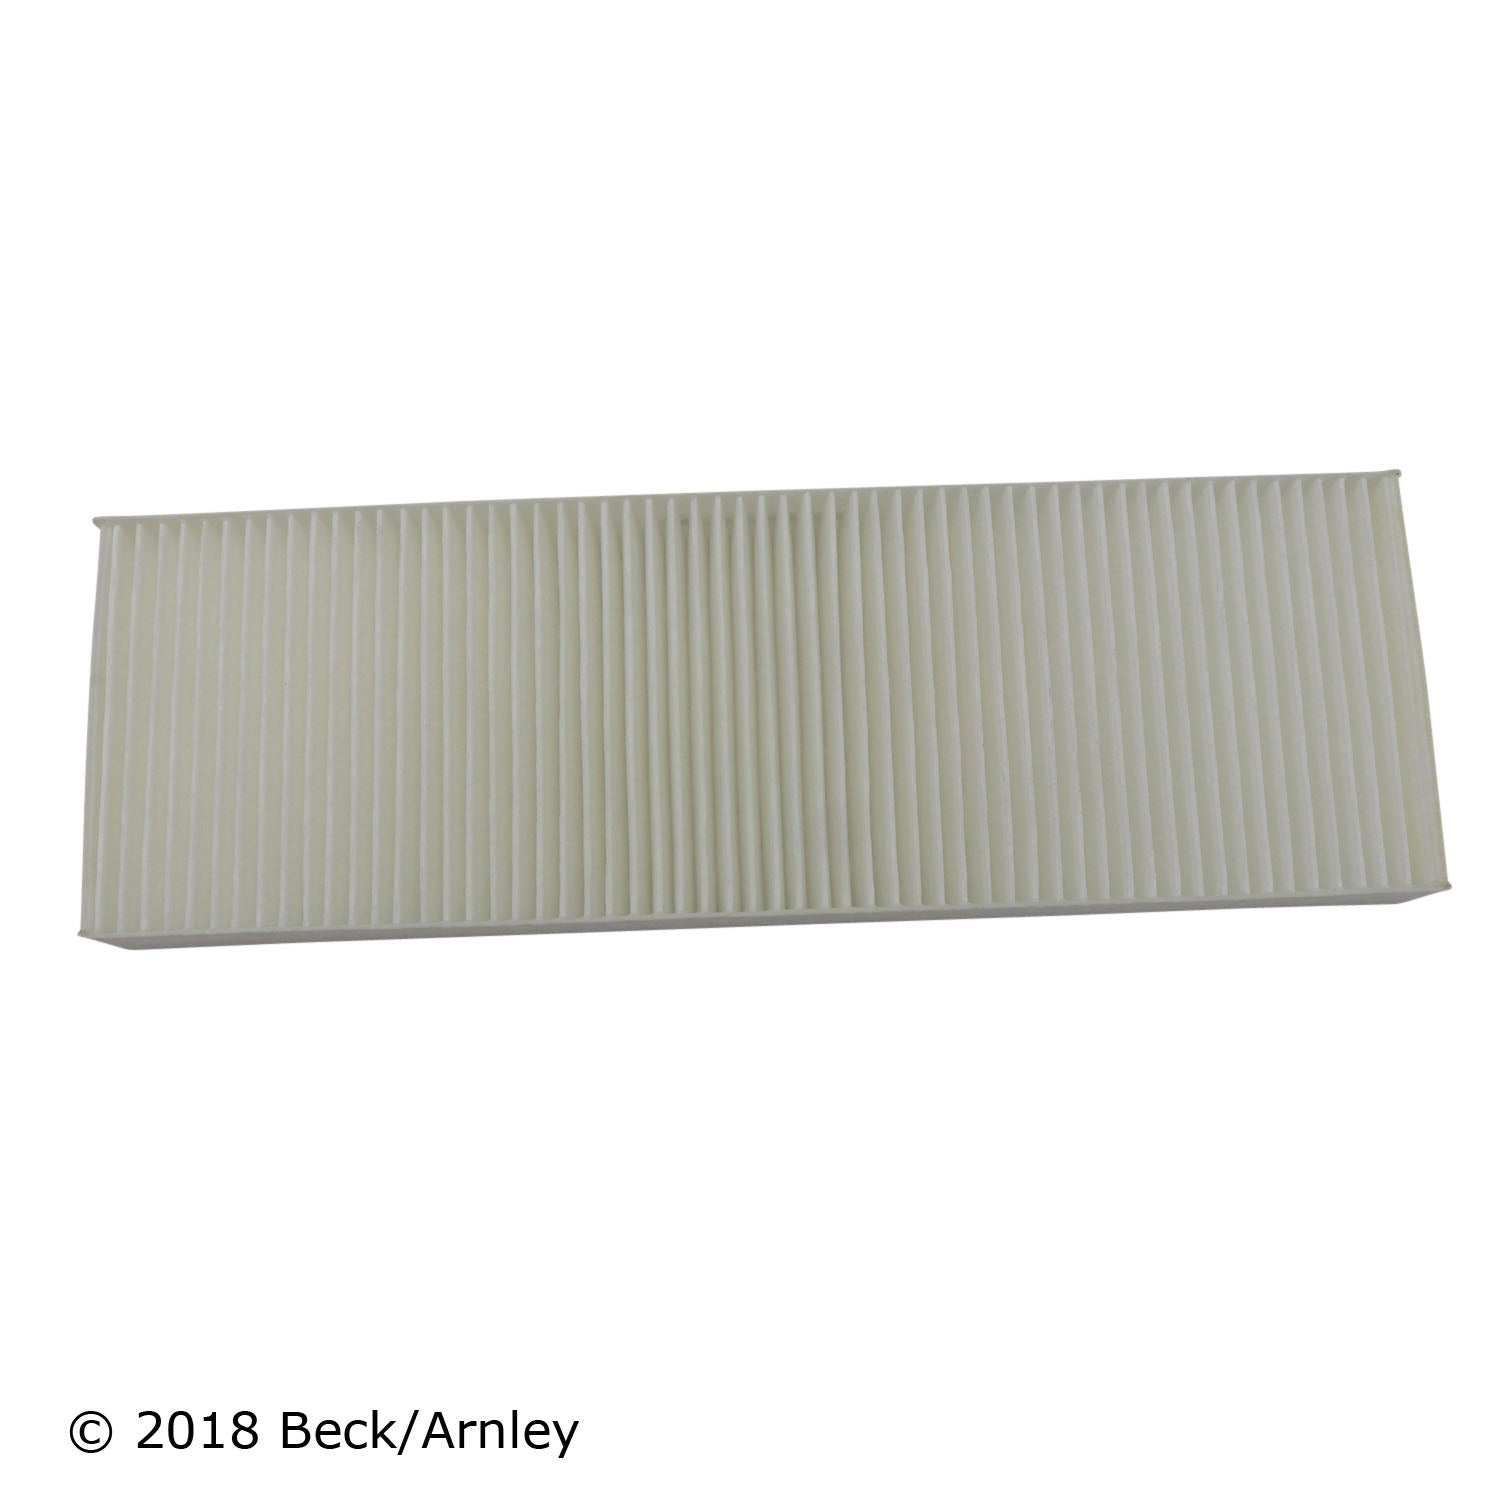 Beck Arnley 042-2016  Cabin Air Filter Set for Acura CL TL Honda Accord FWD